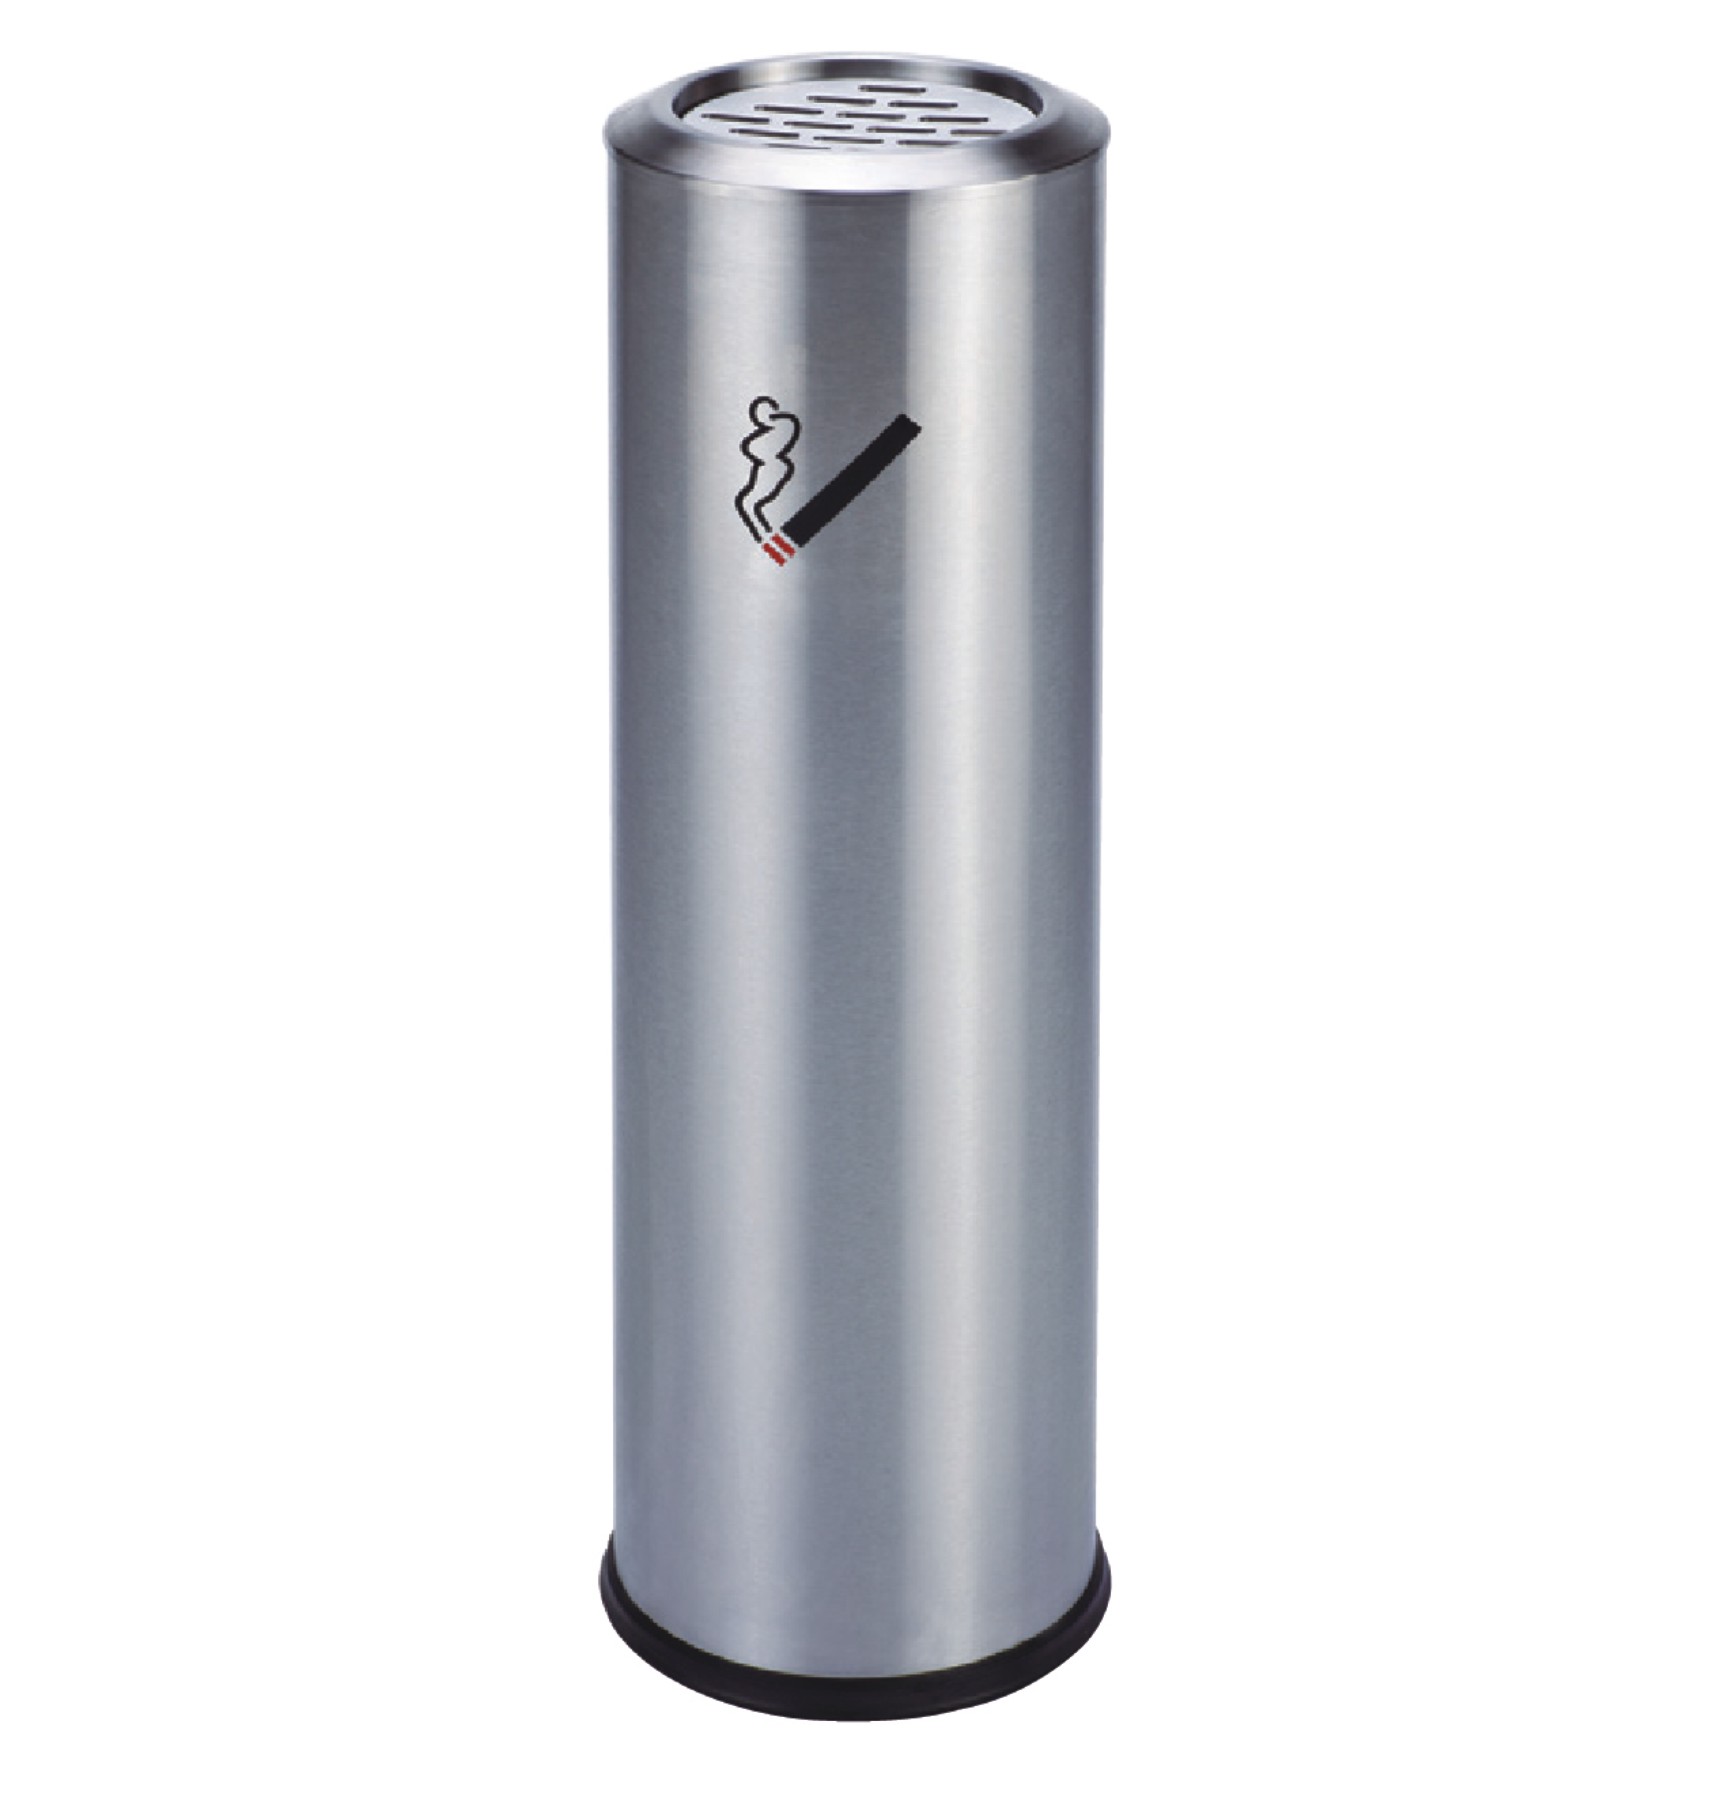 Stainless Steel No Smoking Ashtray (YH-241)